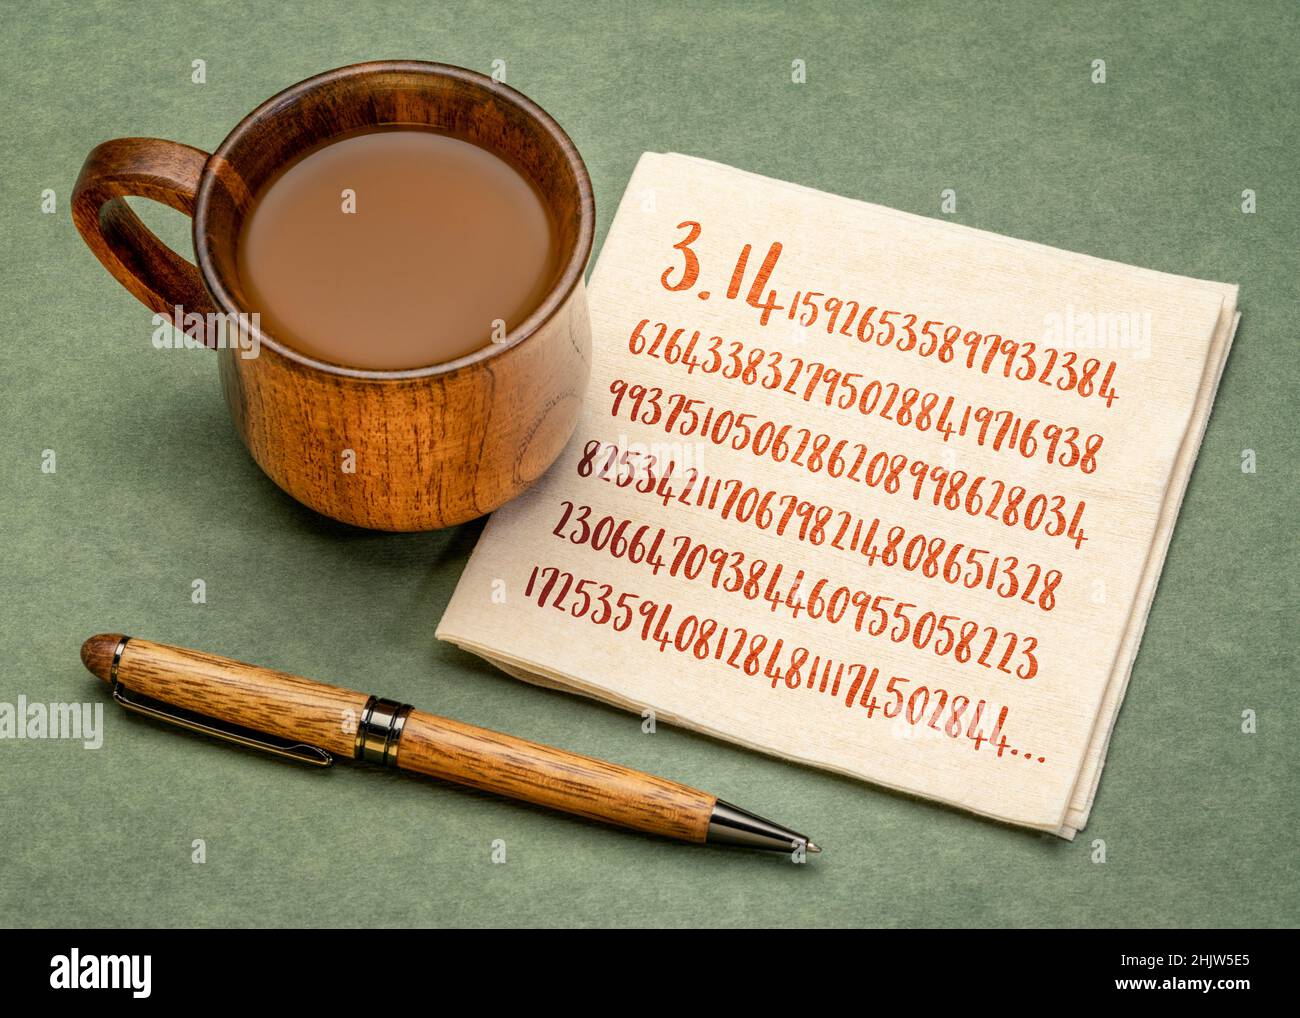 number pi 3.1415 with 140 decimal places - handwriting on a napkin with coffee, mathematics and pi day concept Stock Photo